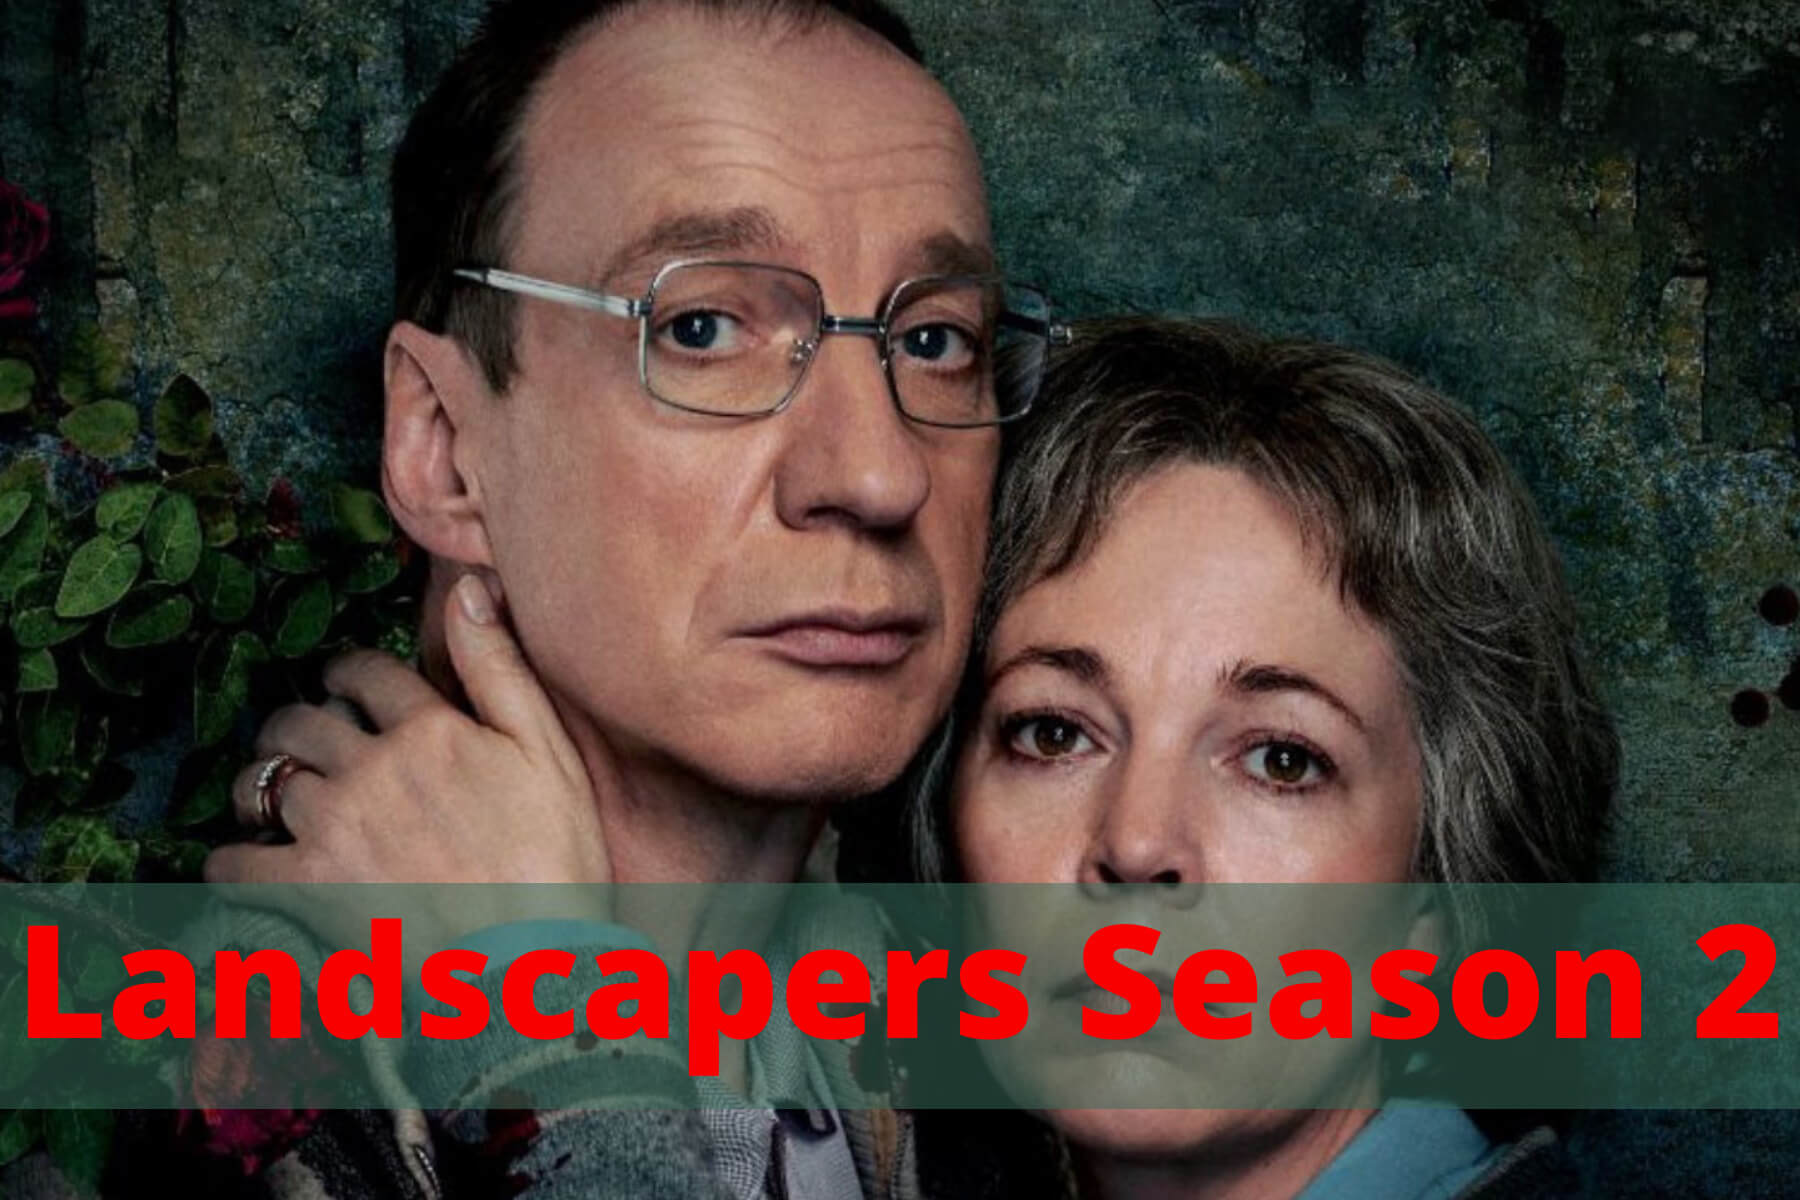 Is There Any News Landscapers Season 2 Trailer?